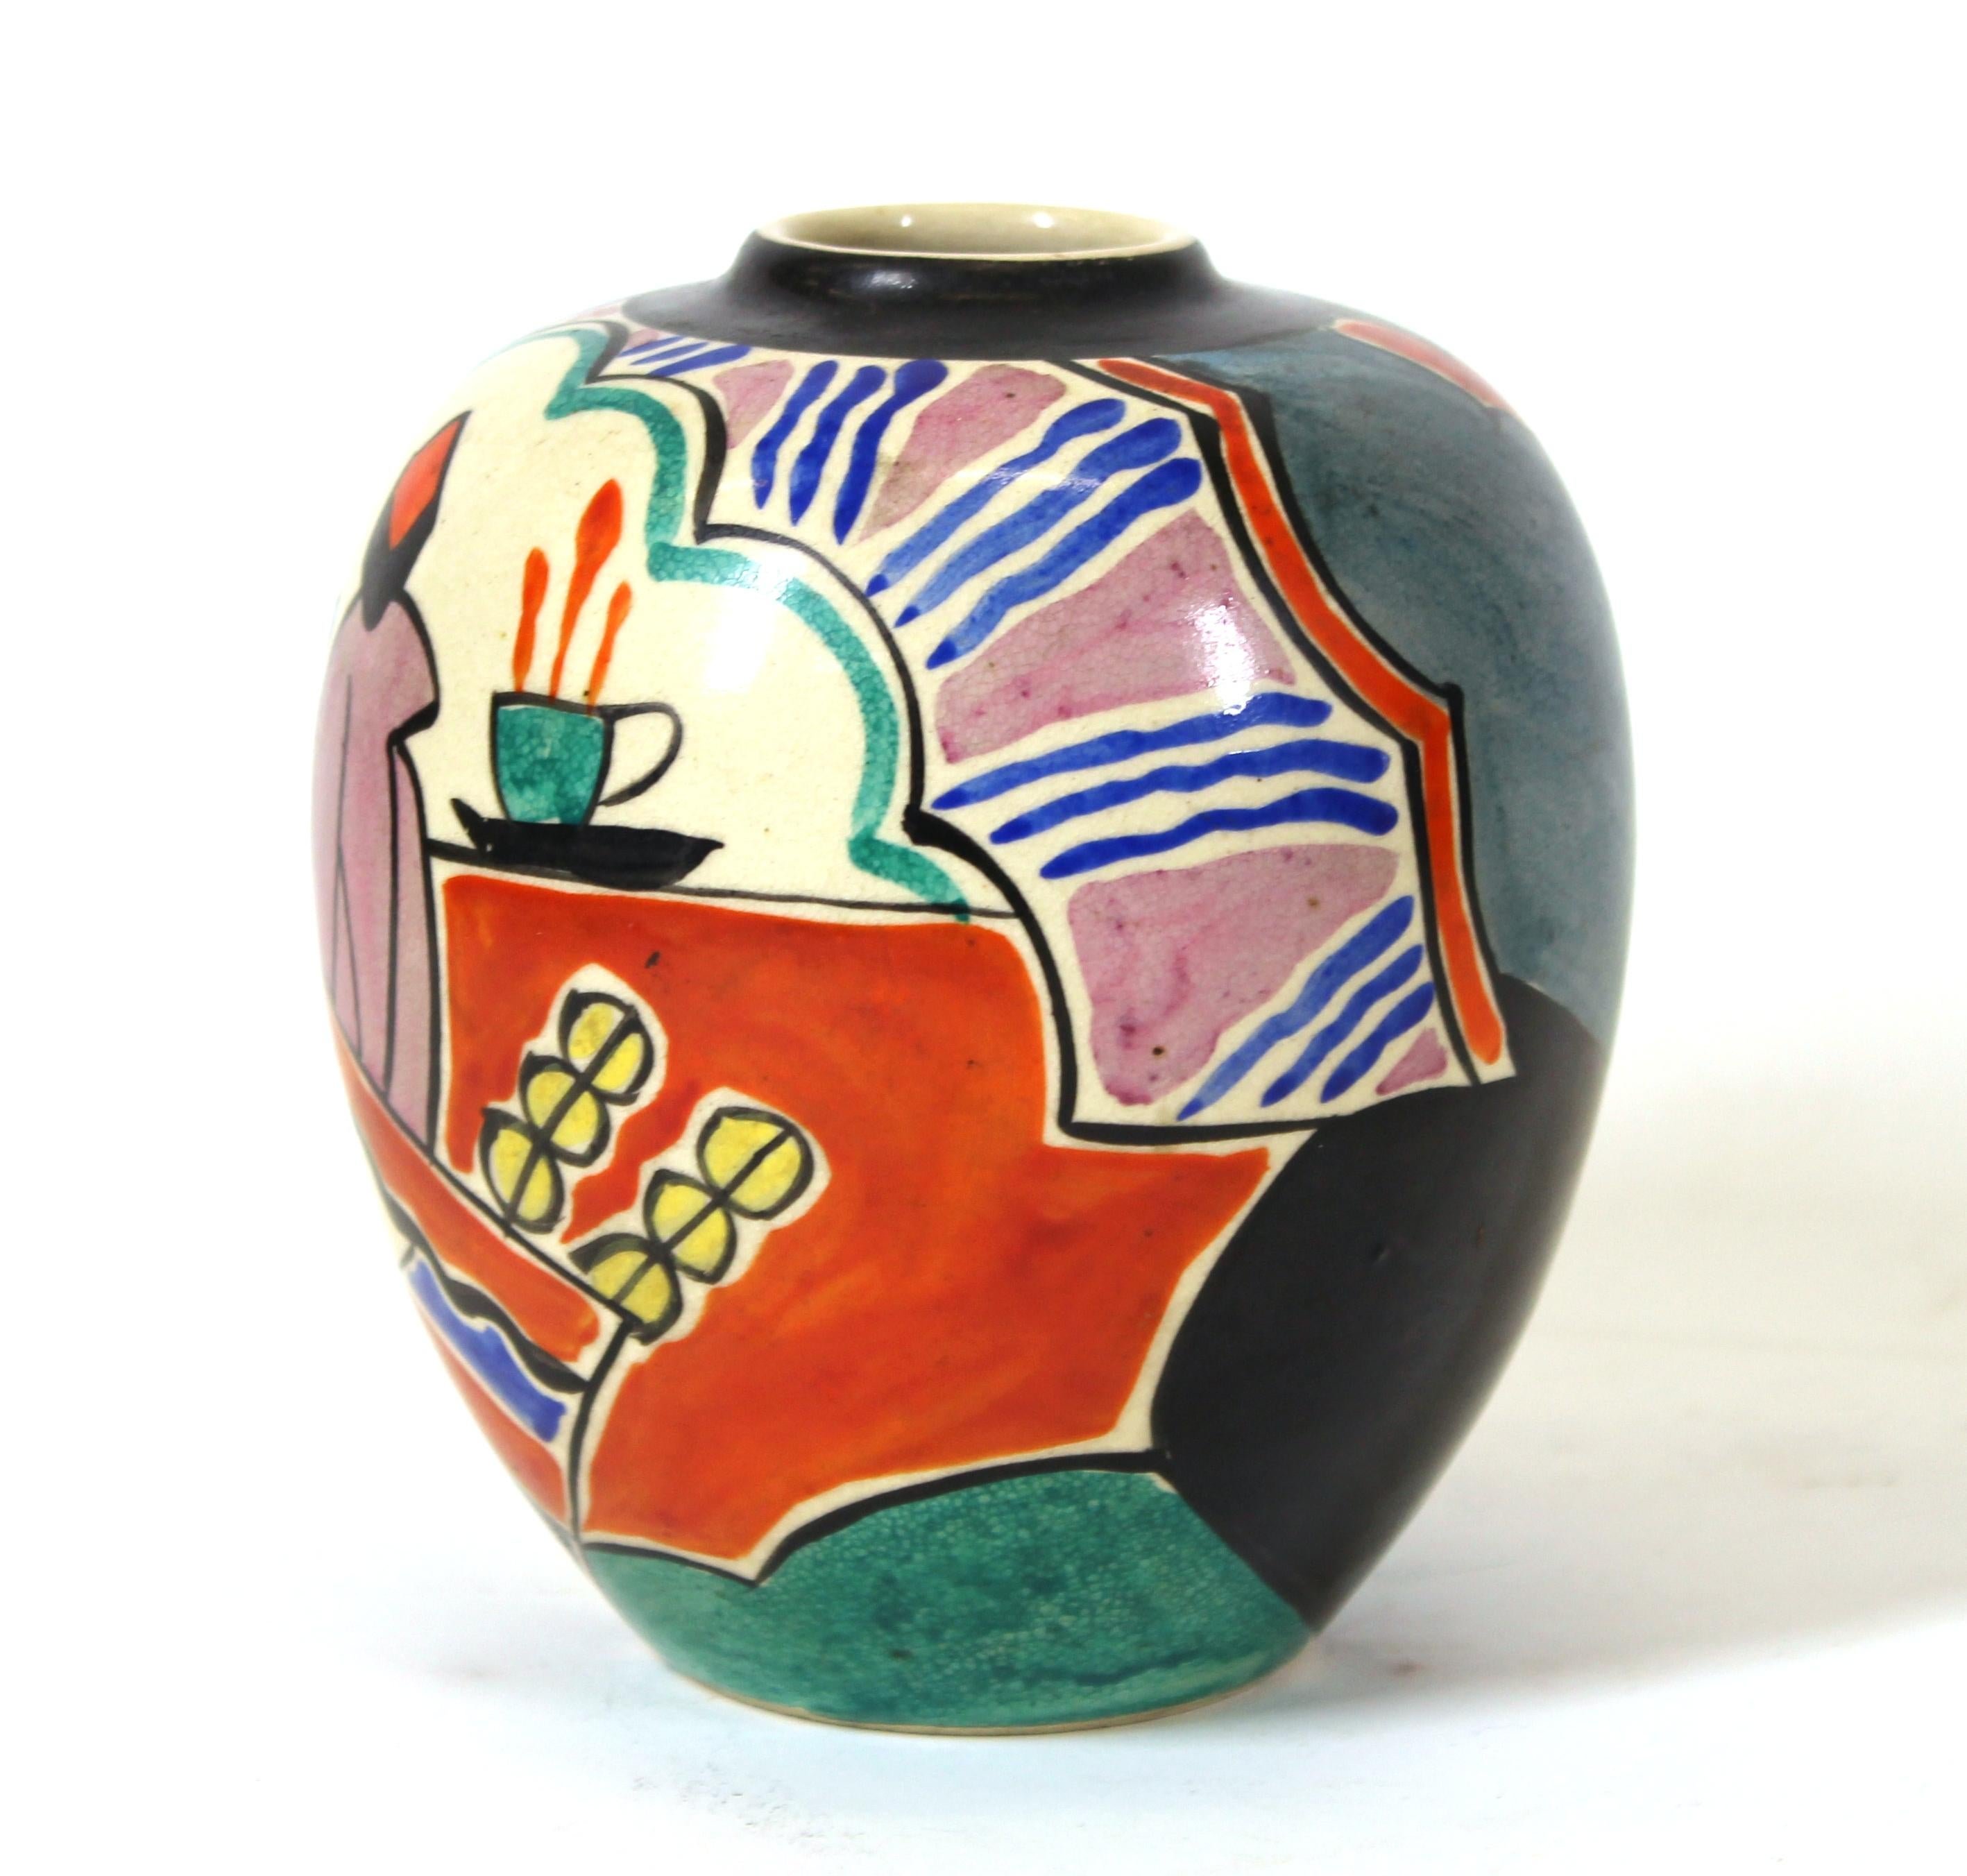 Japanese Art Deco diminutive ceramic vase, hand painted with a modernist scene in Matisse style. Marked 'Made in Japan' on the bottom.